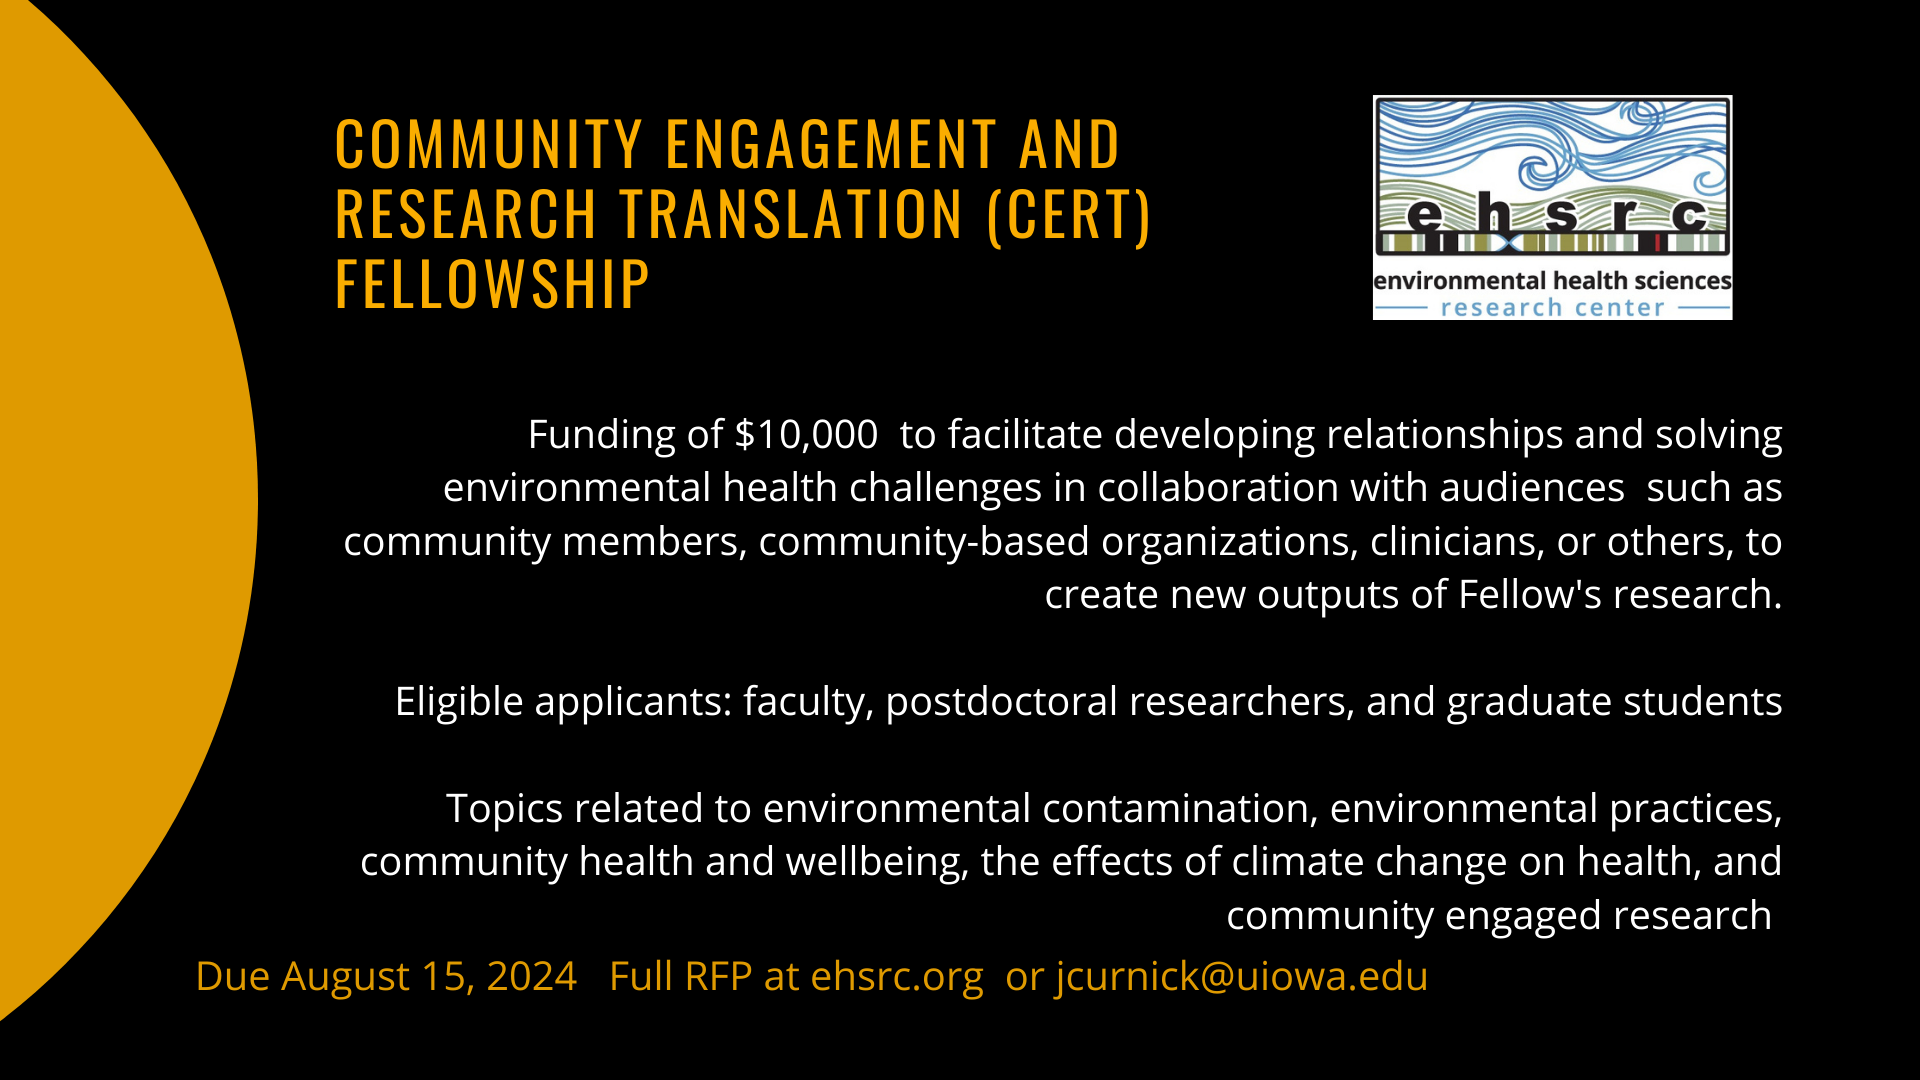 Community Engagement and Research Translation Fellowship applications are due August 15, 2024